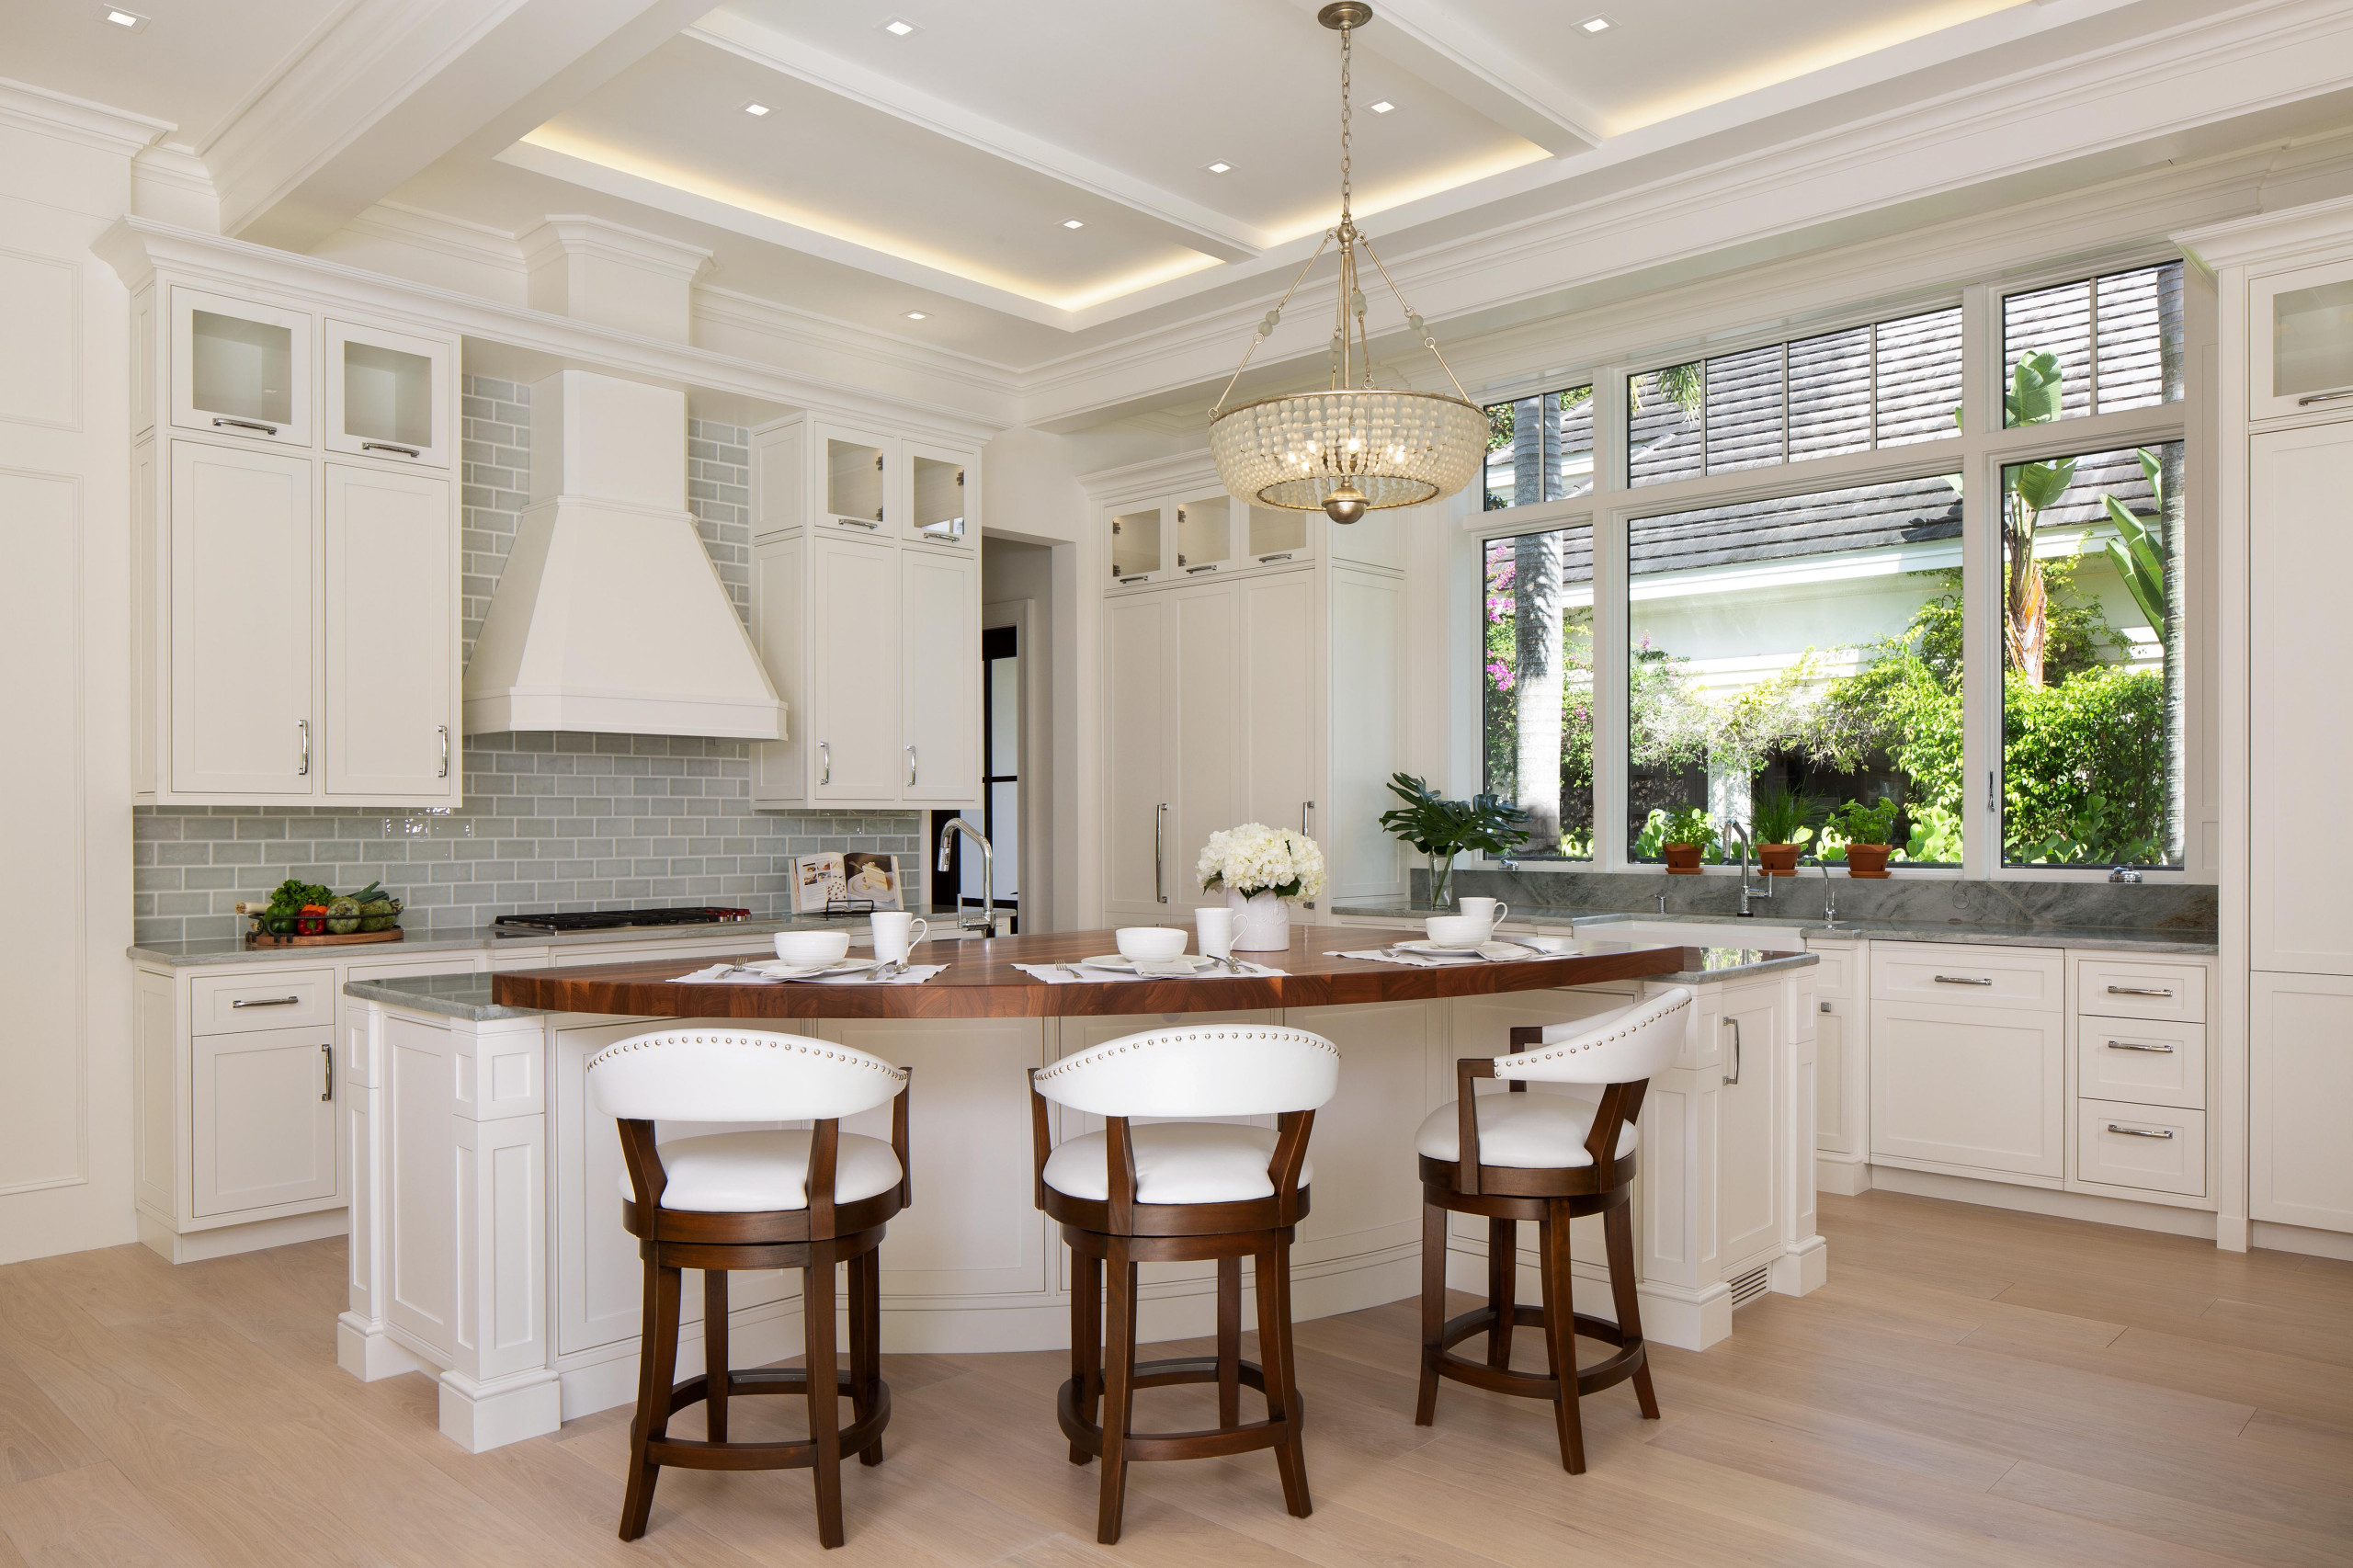 18 All Ceiling Designs Kitchen Ideas You'll Love   May, 18   Houzz